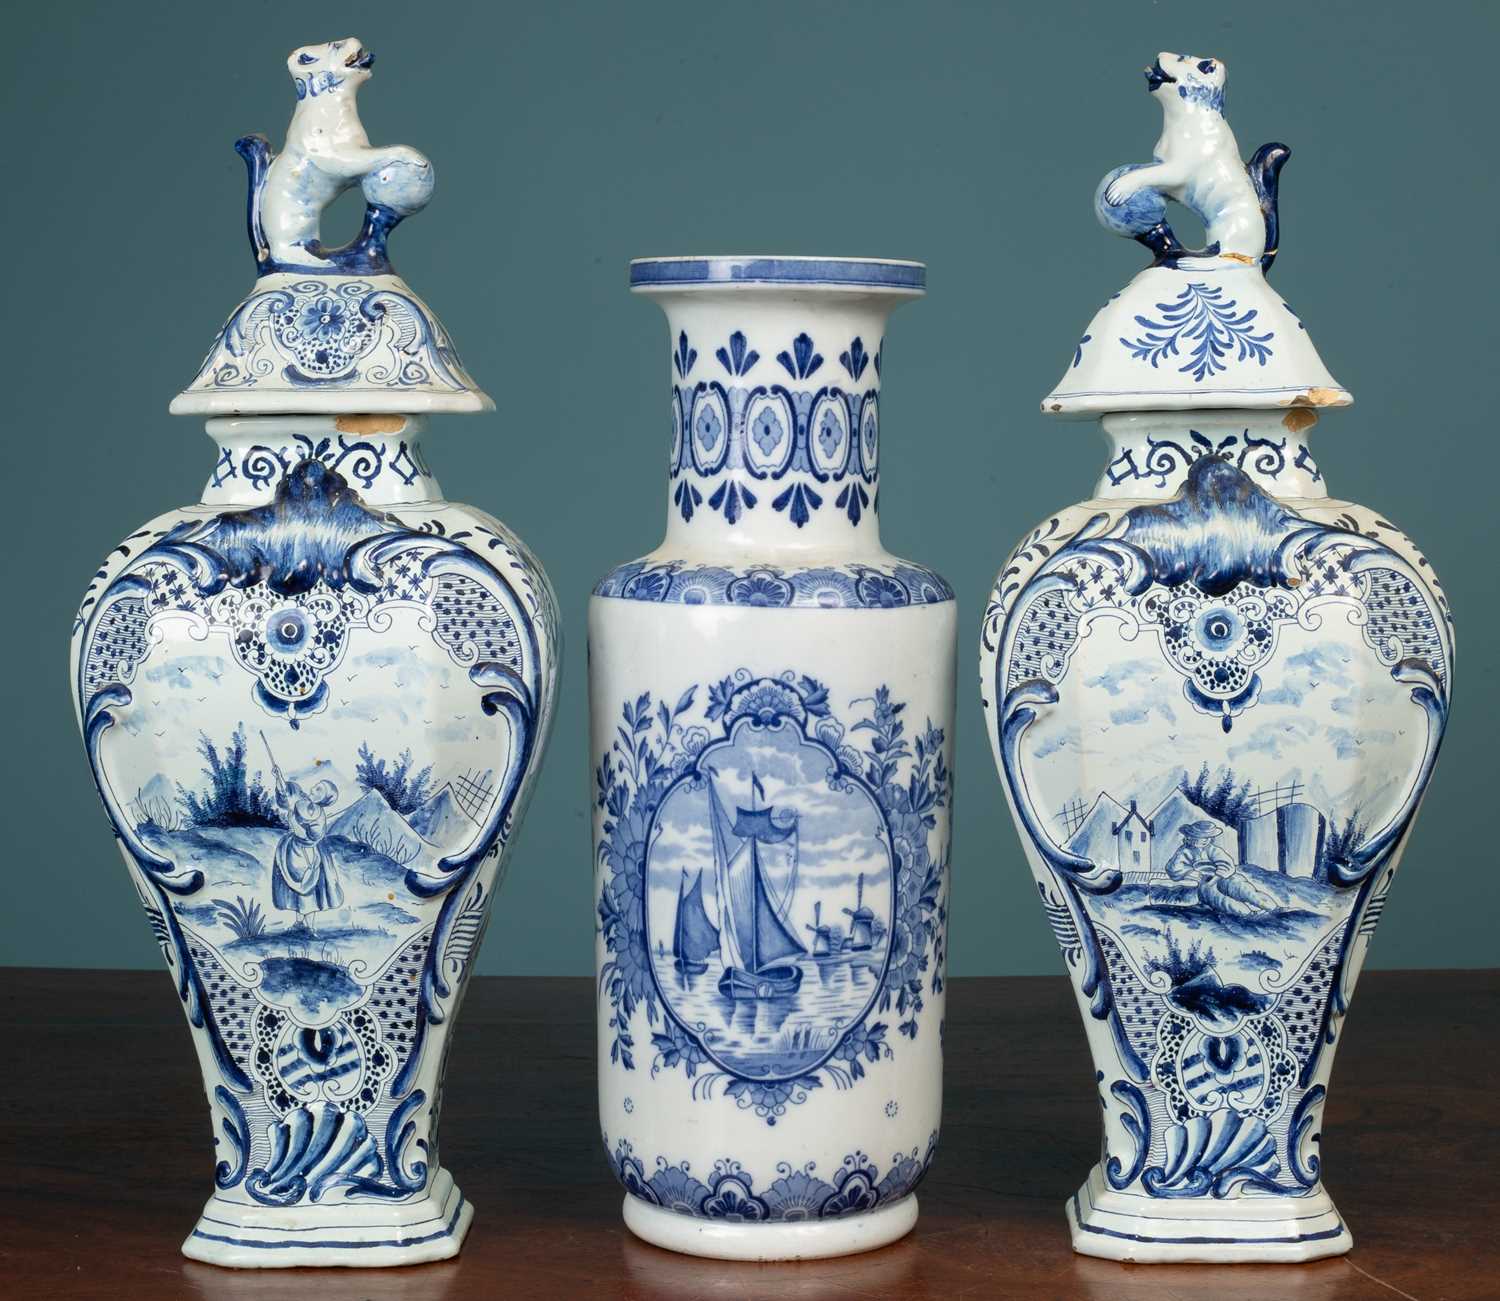 Lot 5 - A pair of Dutch Delft tin-glazed vases; together with another Dutch Delftware vase